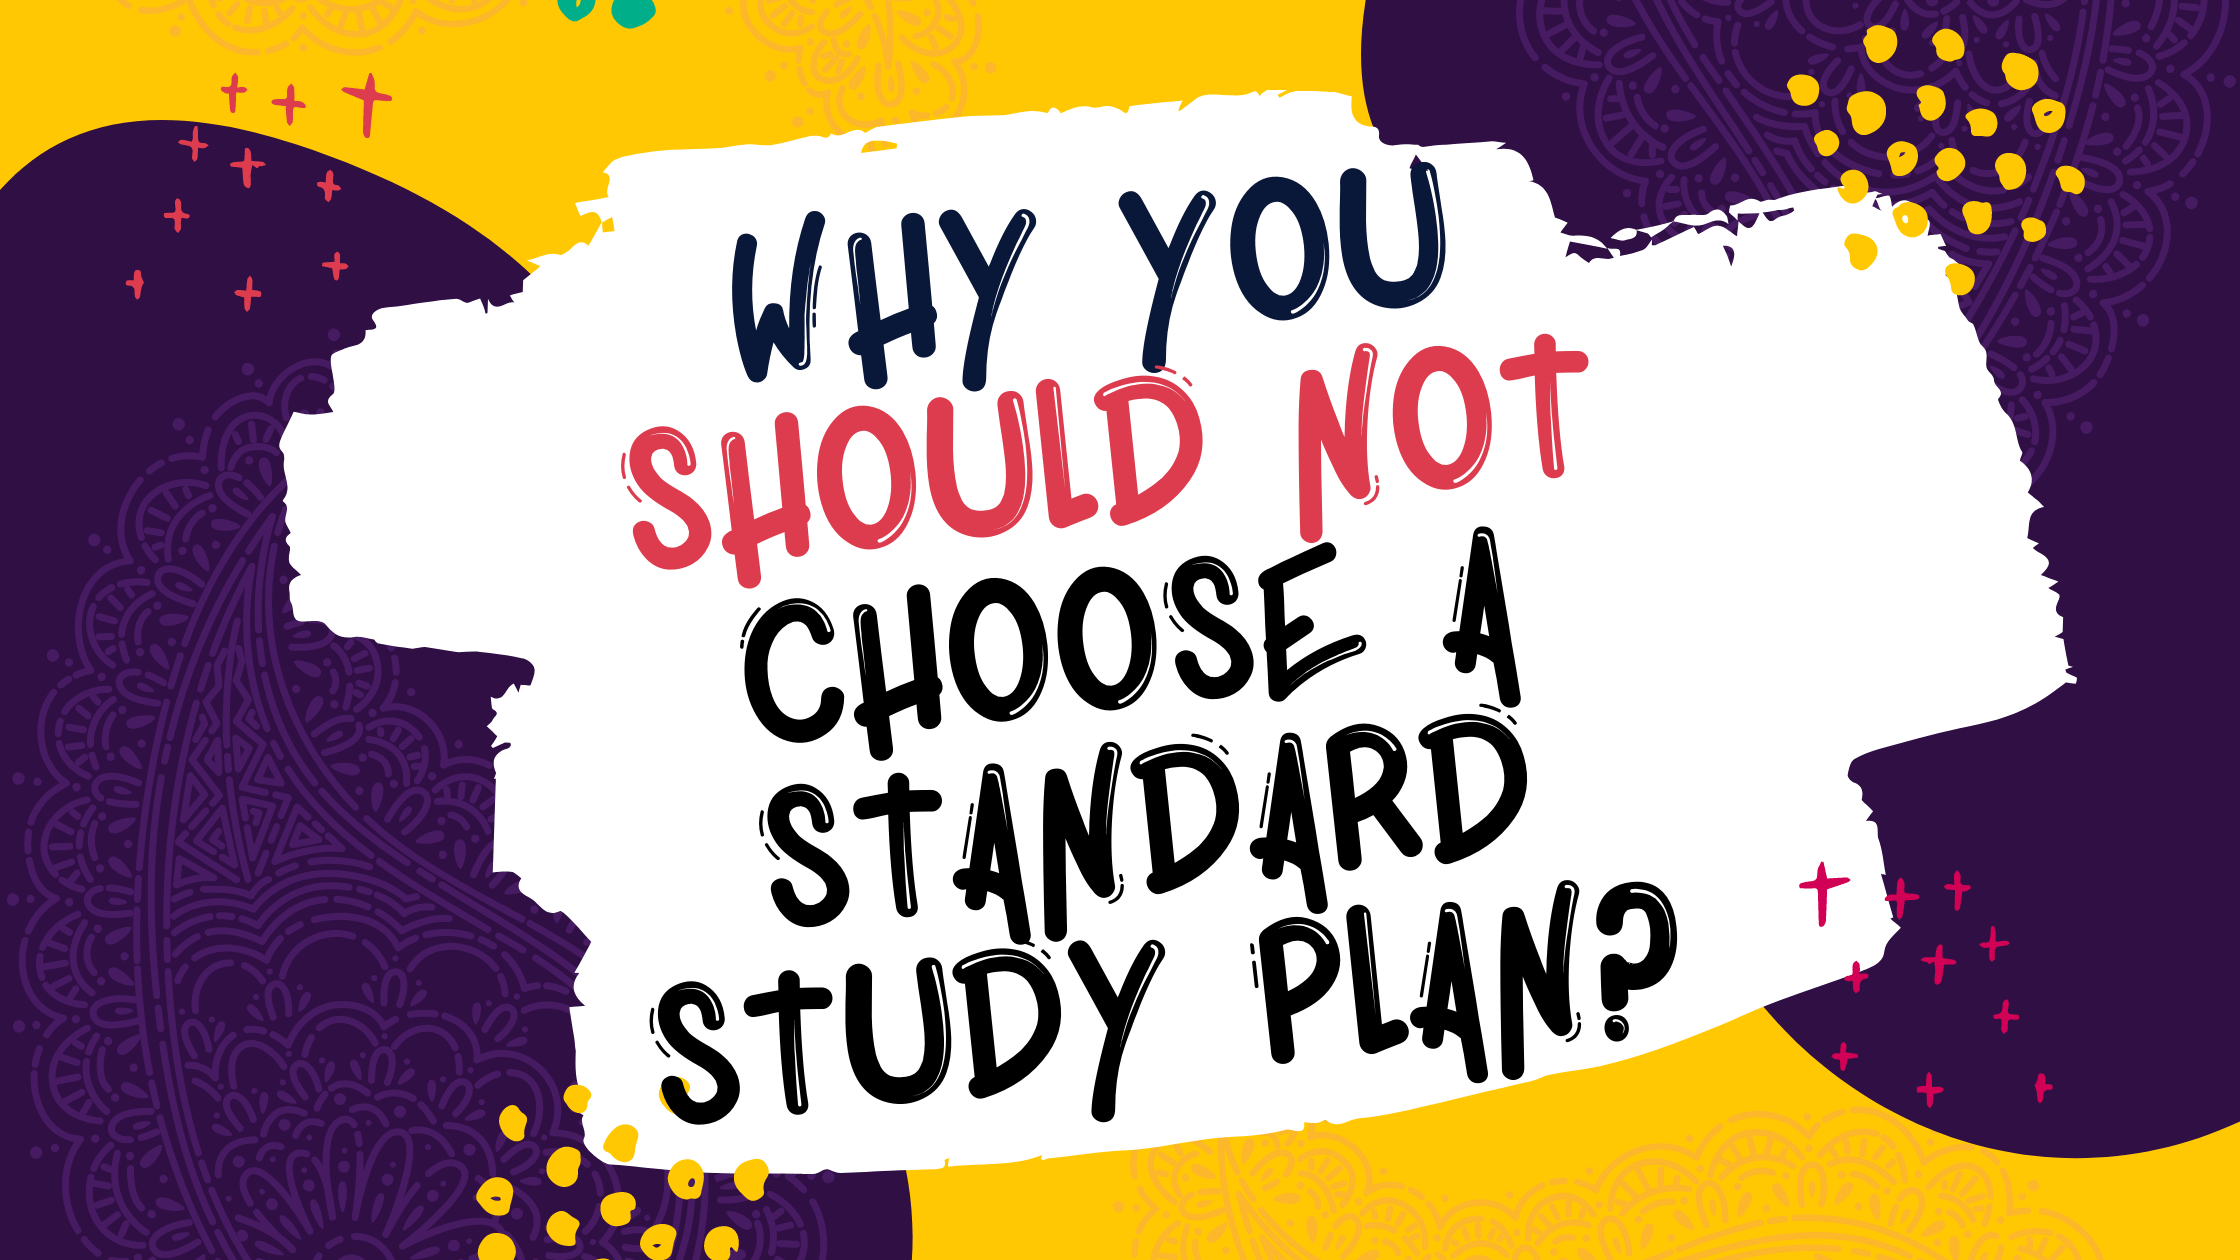 Why you should not choose a standard study plan?